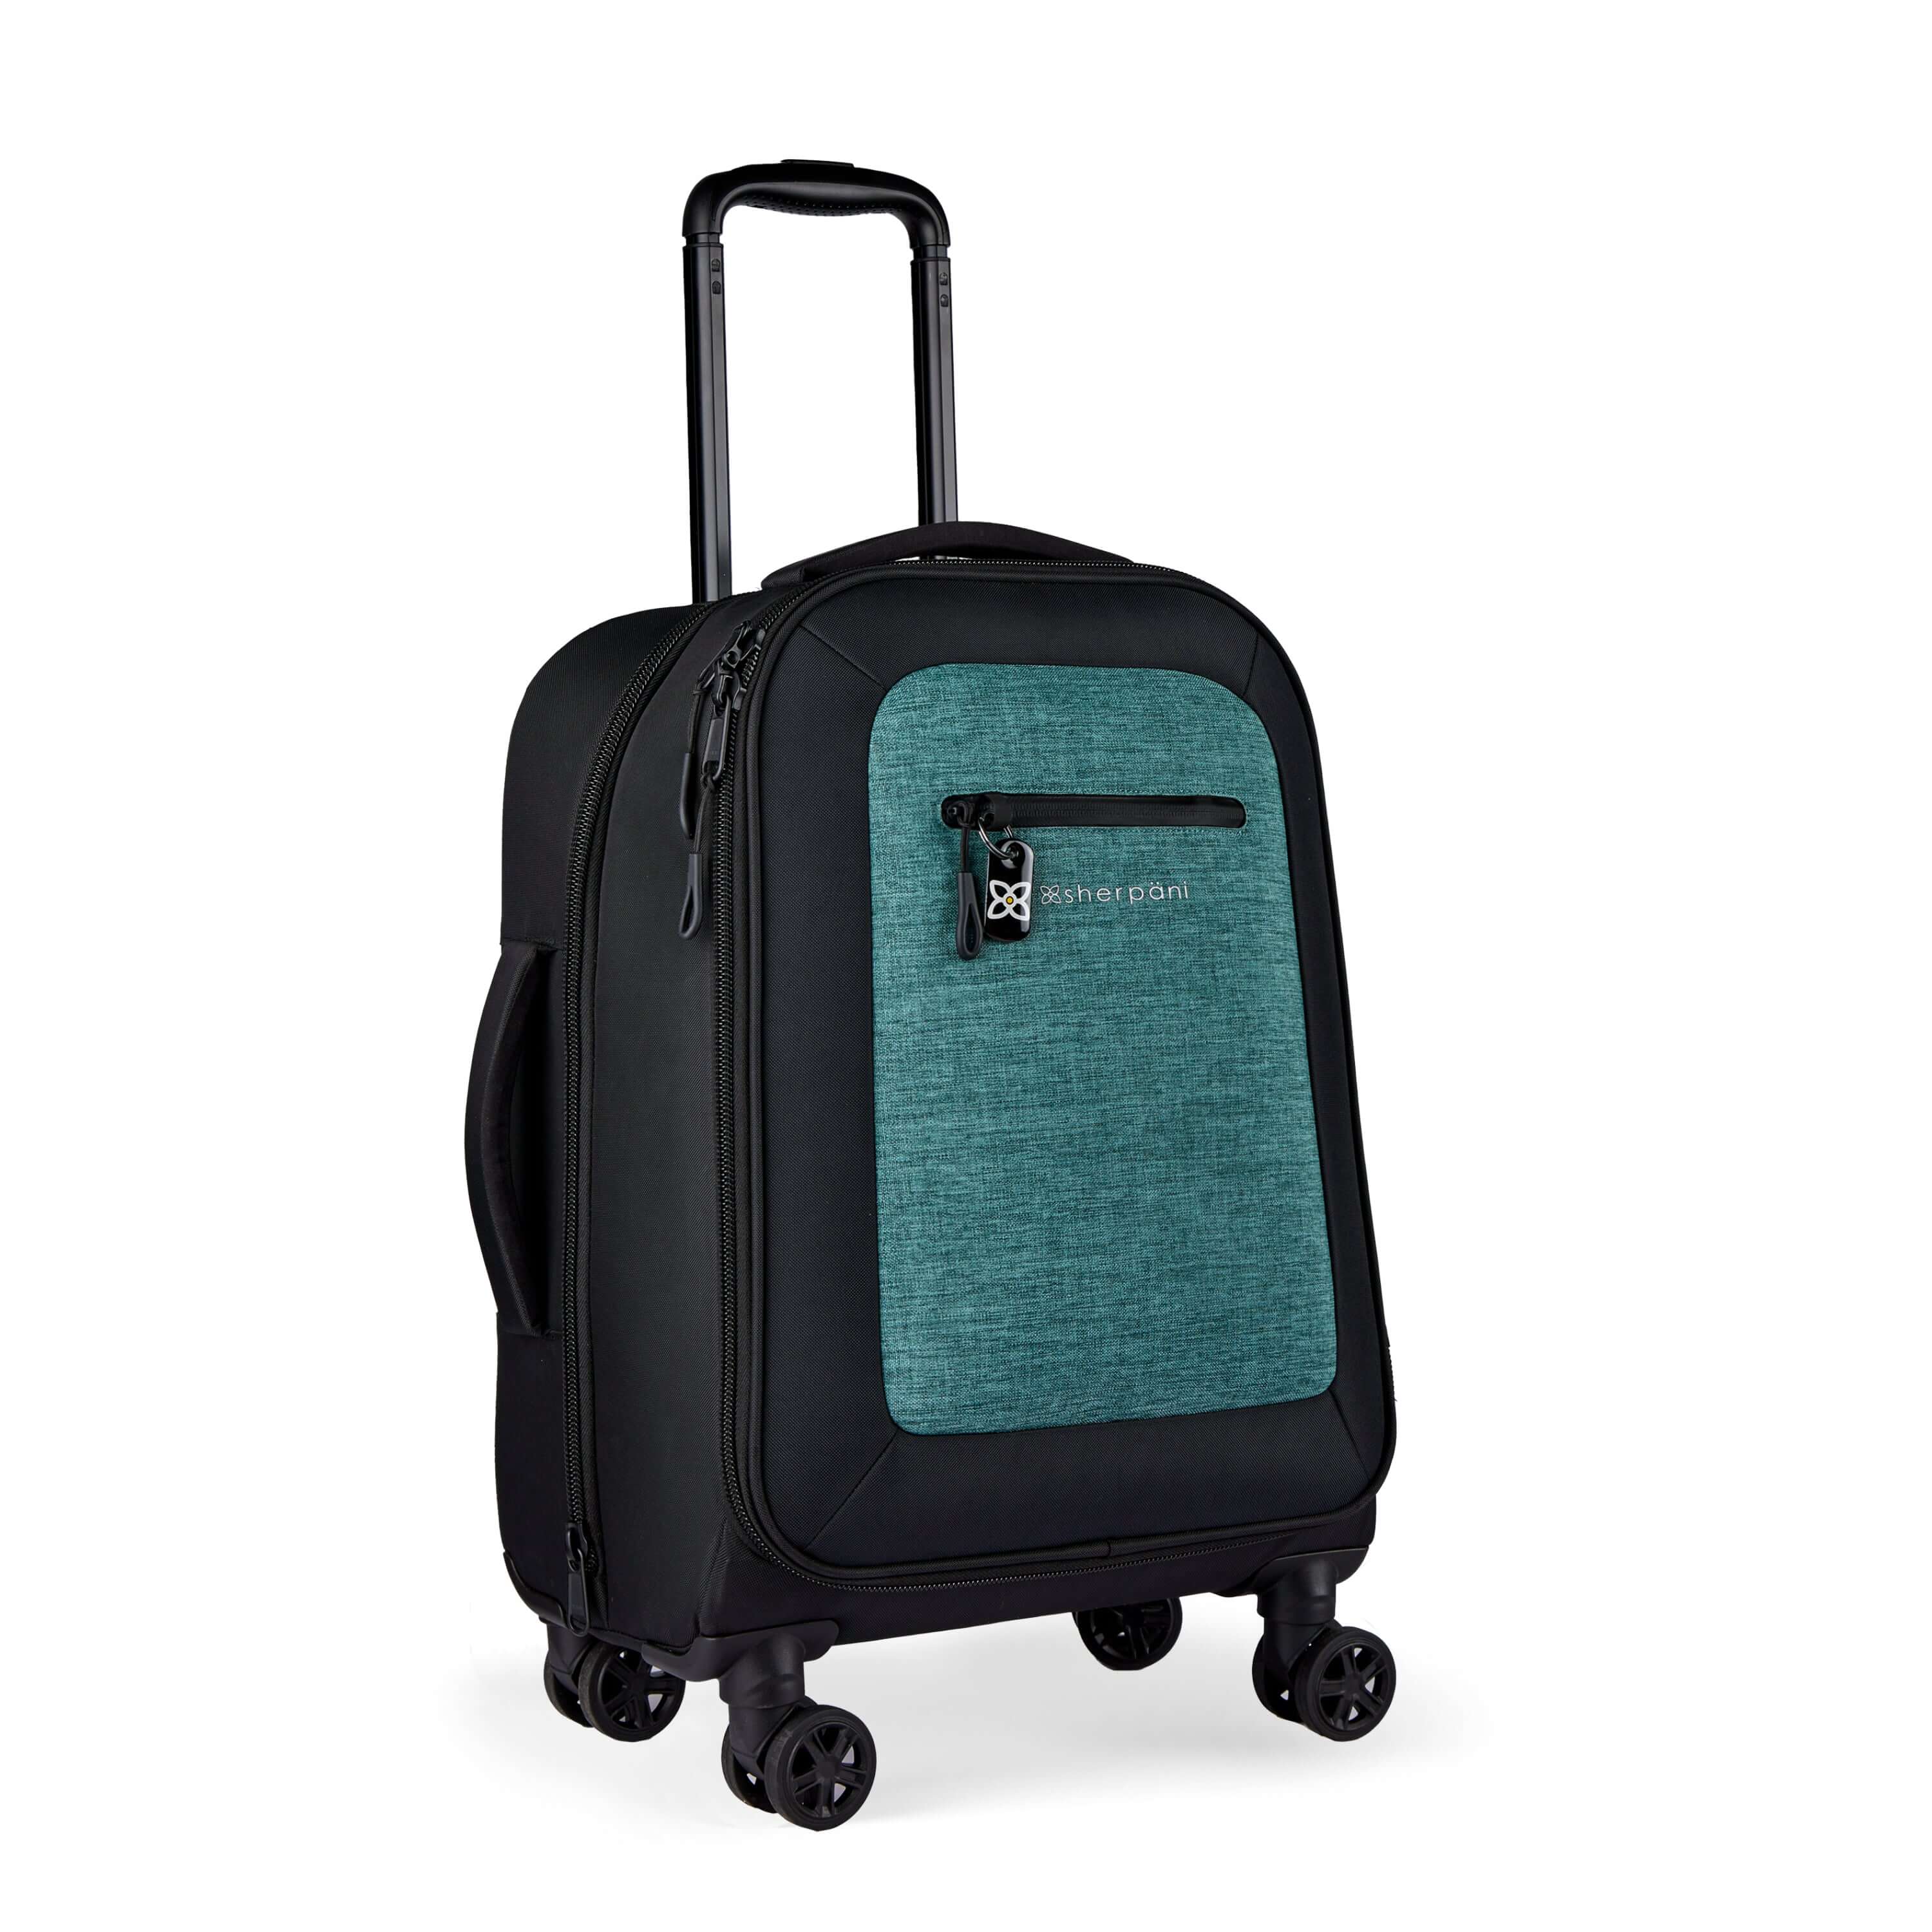 Angled front view of Sherpani’s Anti-Theft luggage the Latitude in Teal. The suitcase has a soft shell exterior made from recycled plastic bottles and features vegan leather accents in black. There is a main zipper compartment, an expansion zipper and an external pocket on the front with a locking zipper and a ReturnMe tag. On the top of the suitcase sits a retractable luggage handle. On the side sits an easy-access handle. At the bottom are four 360-degree spinner wheels for smooth rolling. #color_teal